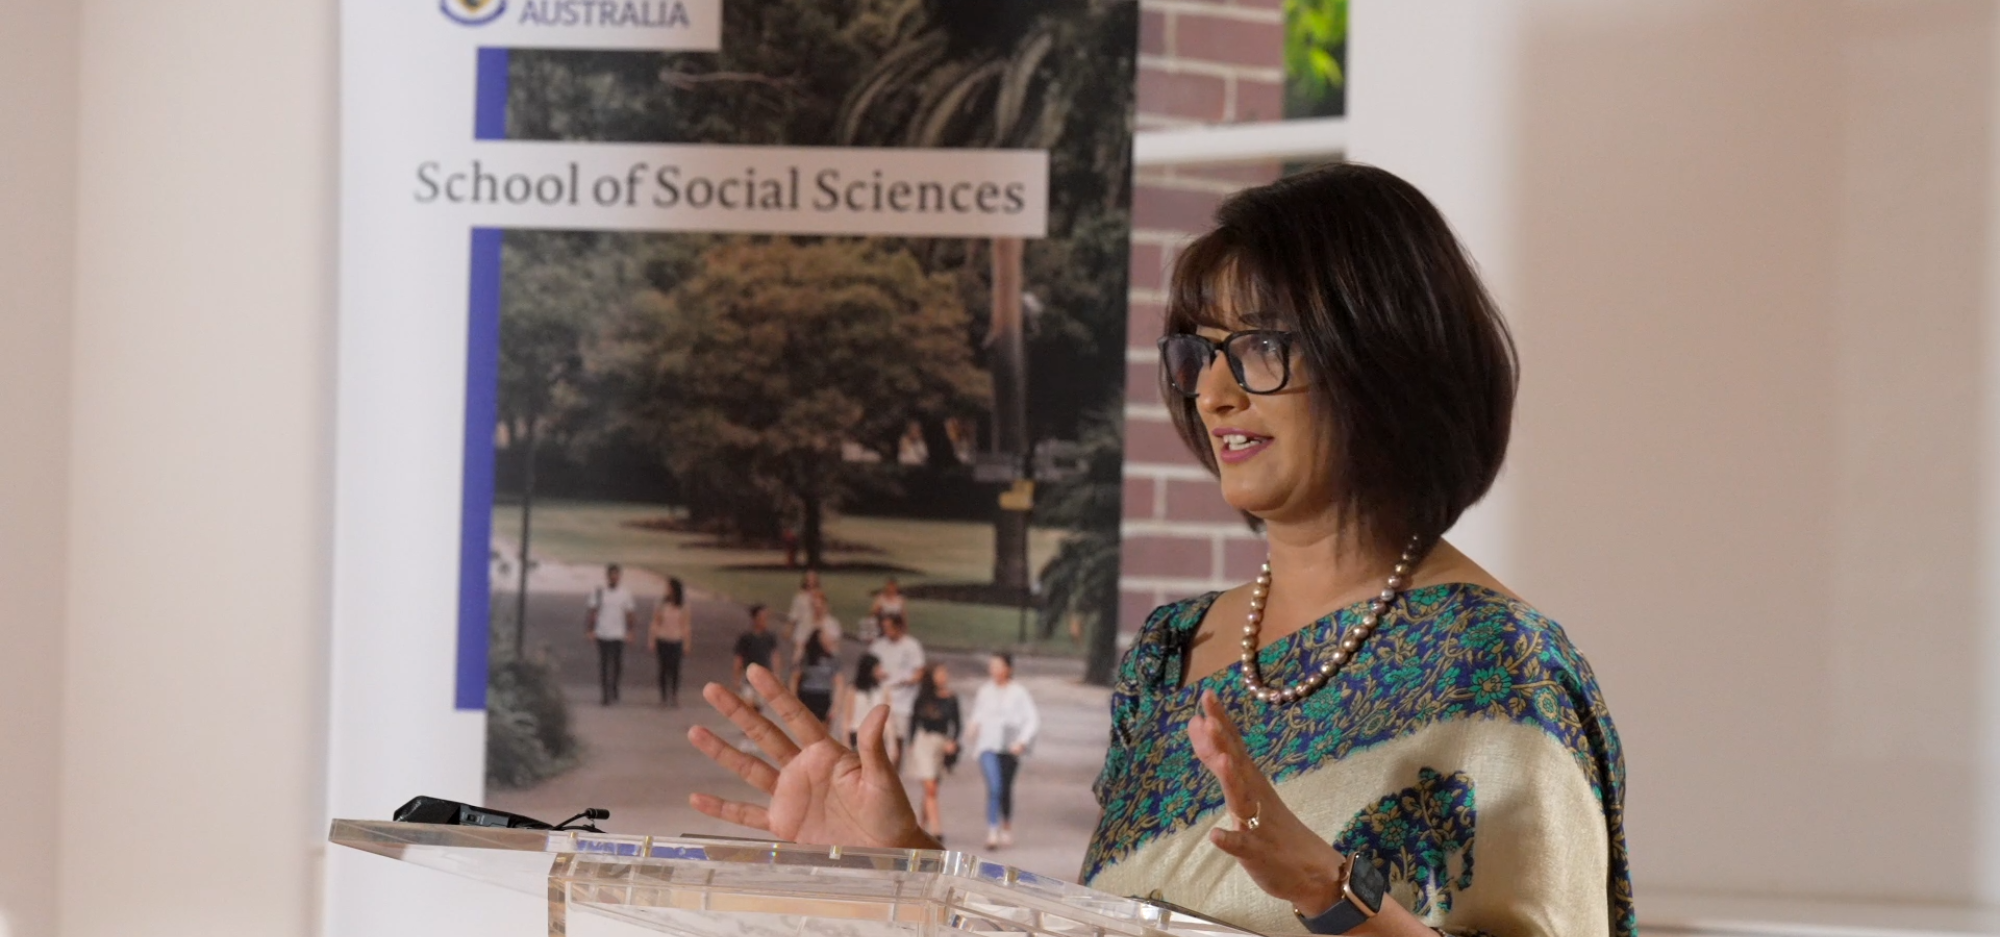 Dr Parwinder Kaur has short brown hair and black glasses and wears a blue and white shawl and a pearl necklace. They stand at a lectern in front of a UWA social sciences poster and gesture with their hands mid-presentation.